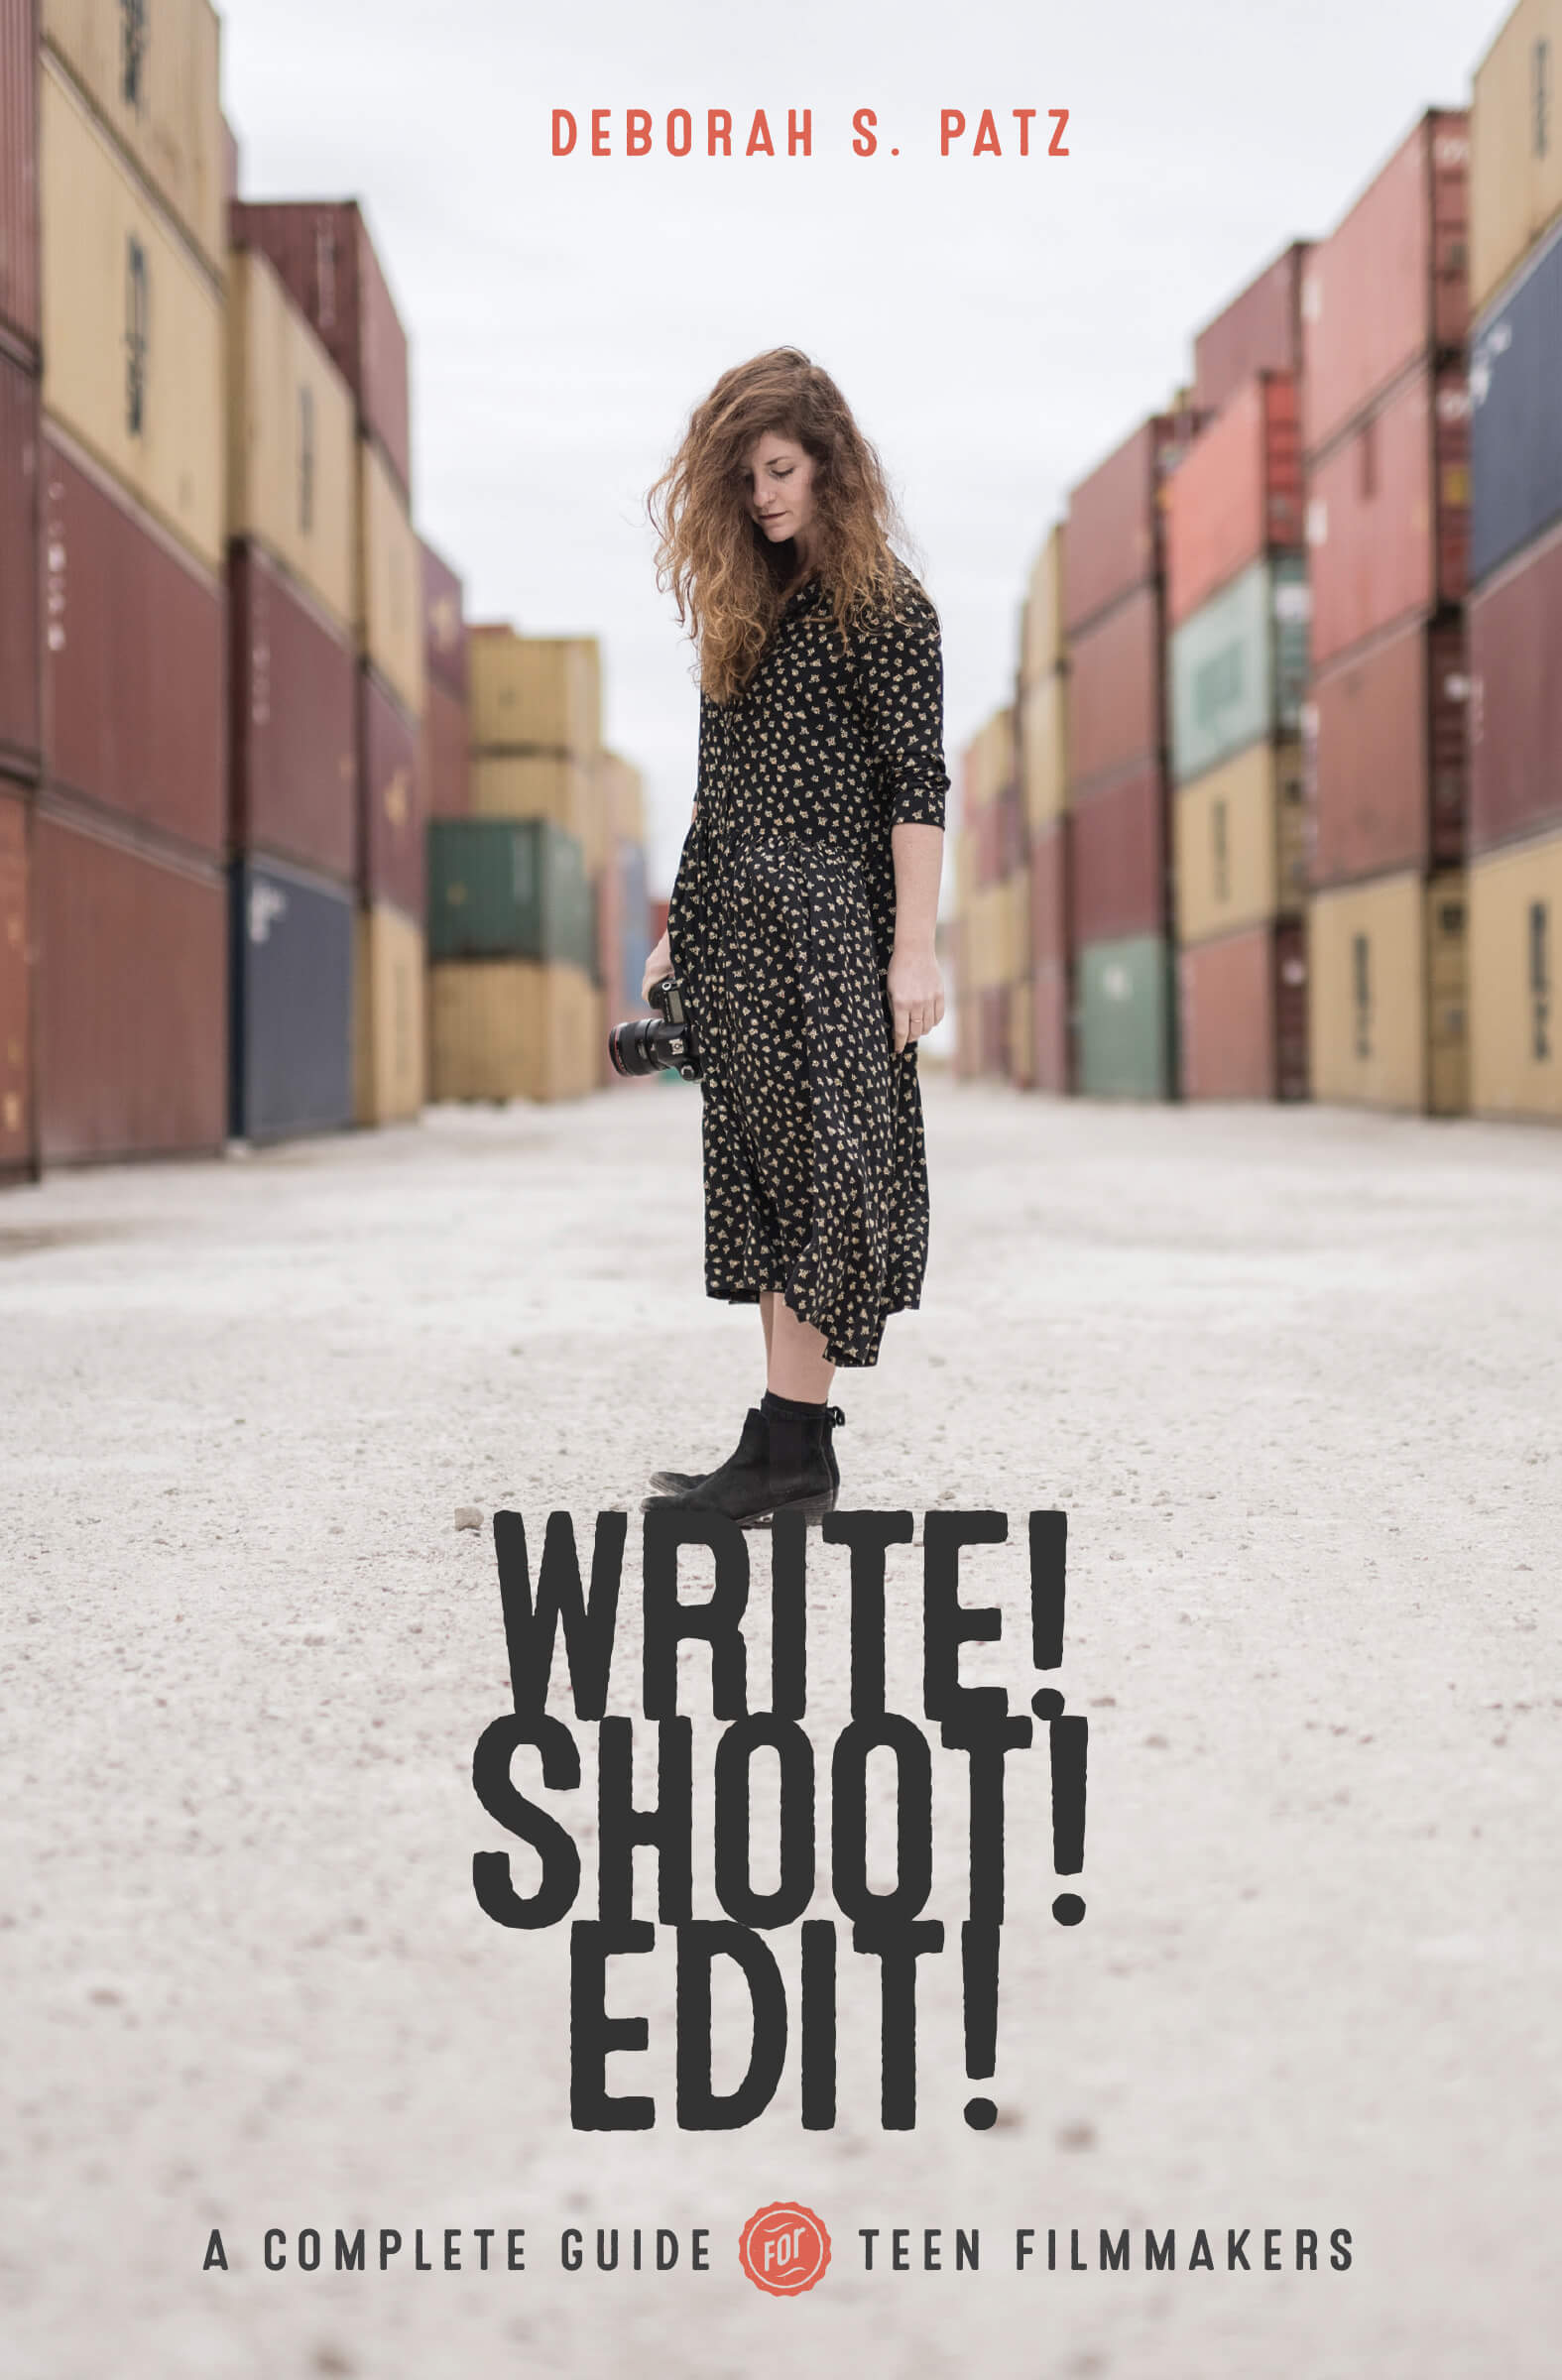 WRITE! SHOOT! EDIT! The Complete Guide for Teen Filmmakers